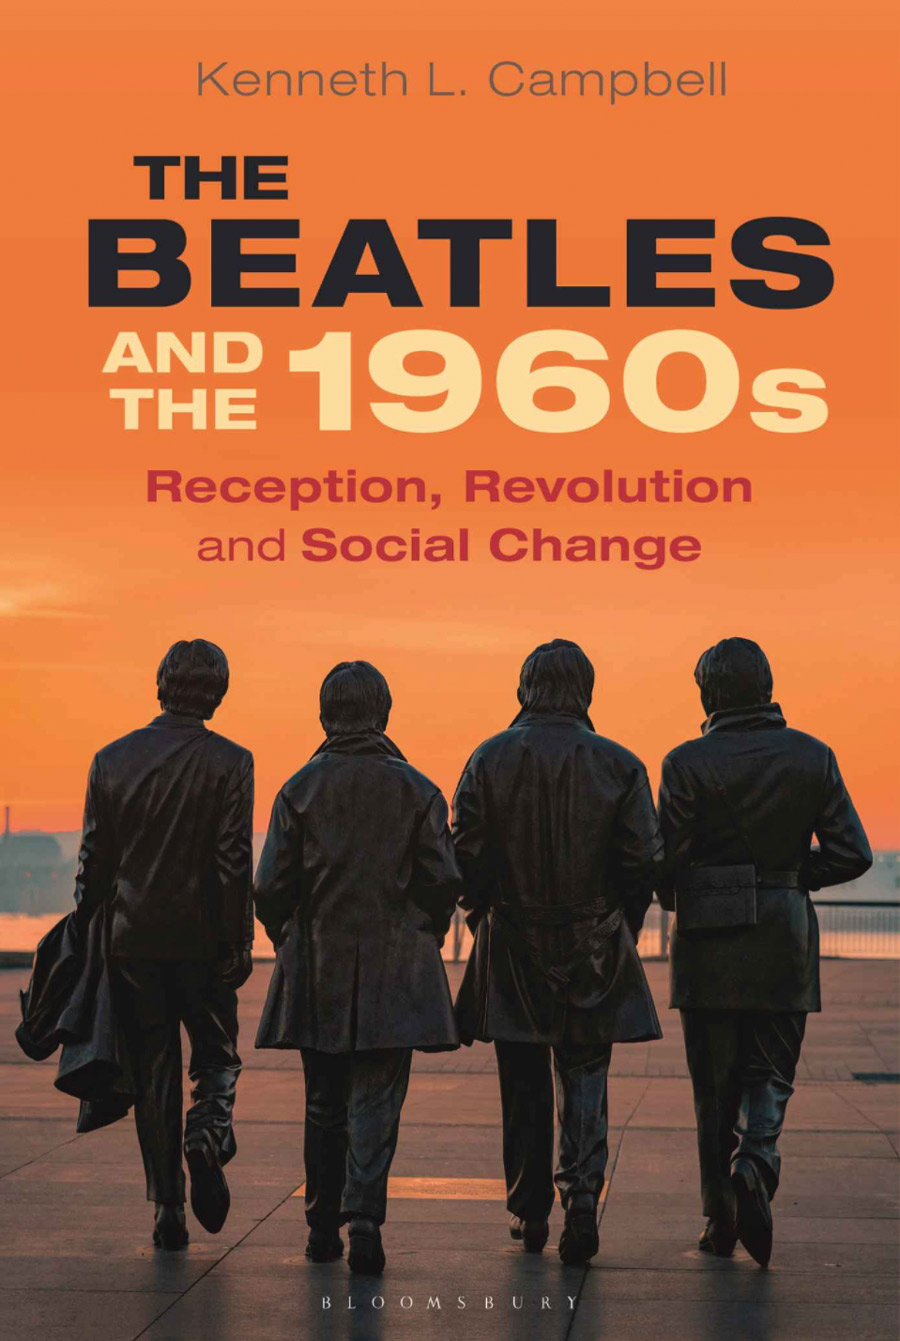 Book titled "The Beatles and the 1960s: Reception, Revolution, and Social Change." by Kenneth Campbell